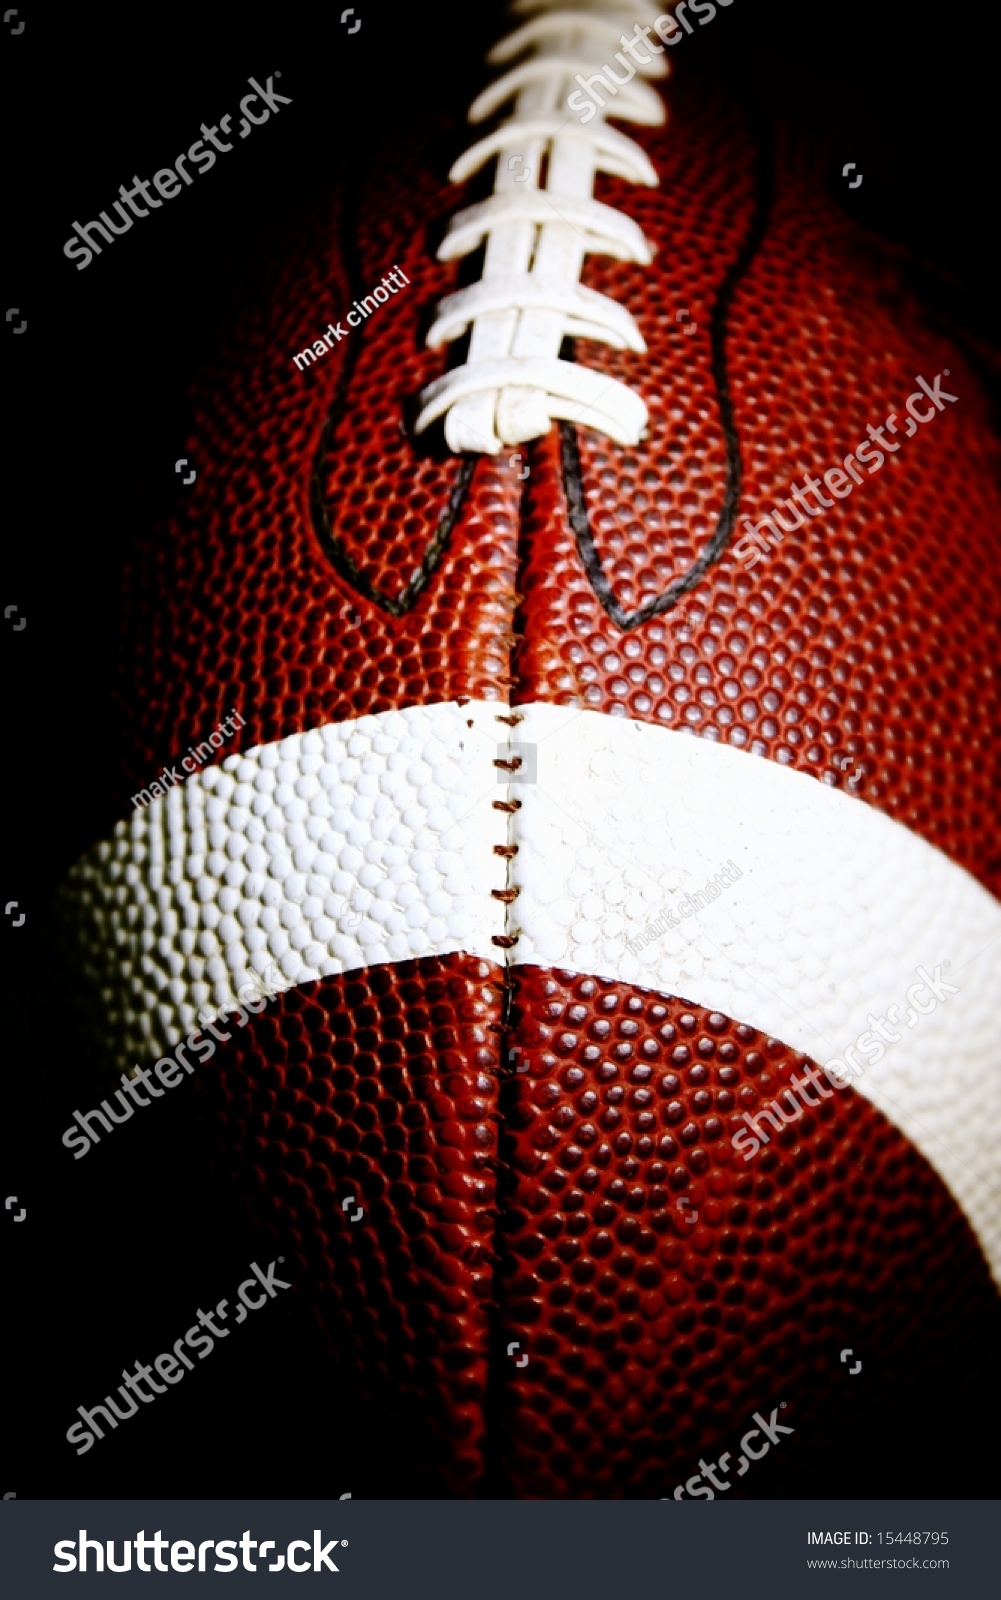 Close American Football Against Black Background Stock Photo 15448795